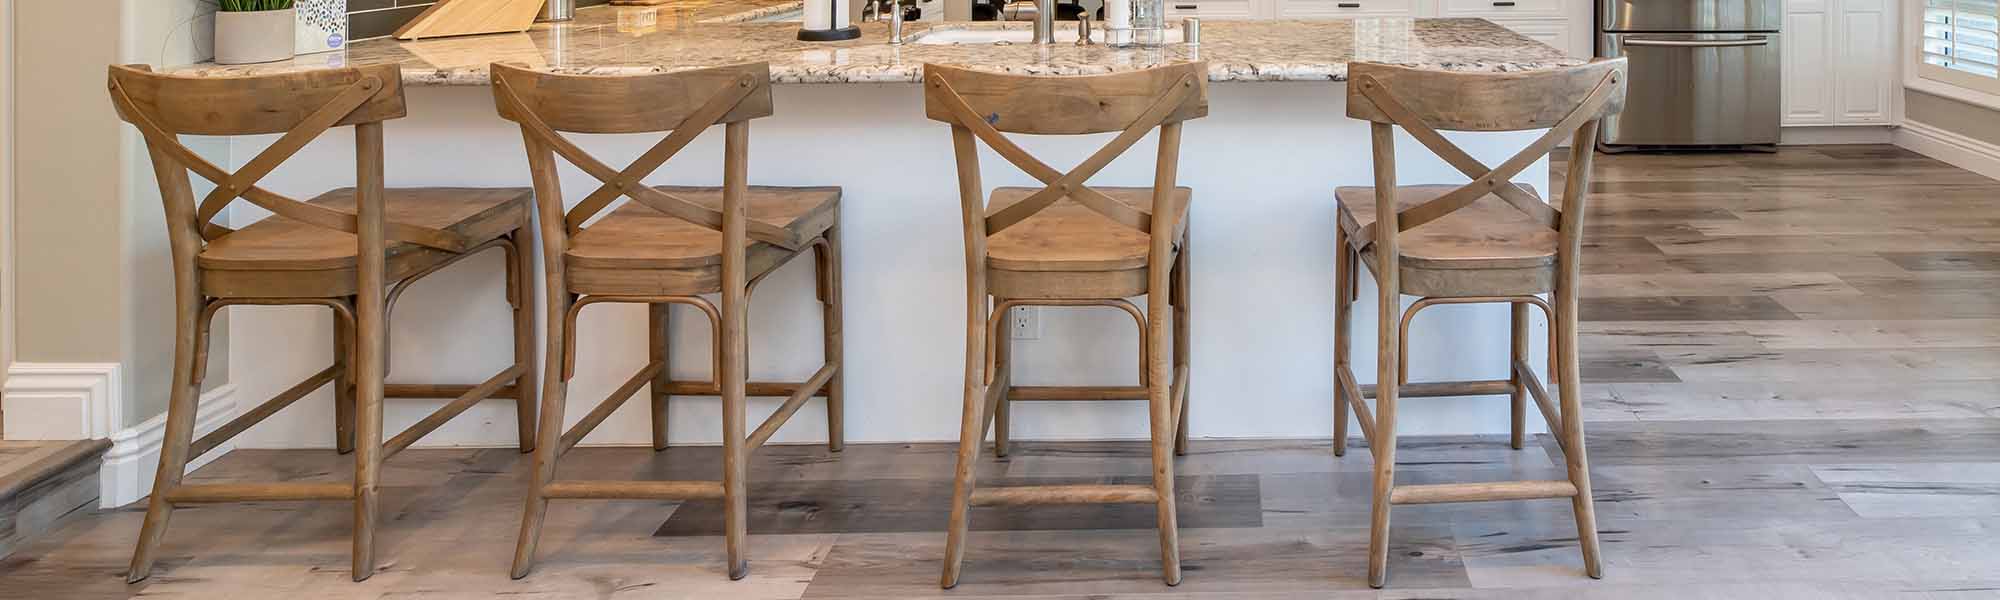 Scandinavian-style wooden chairs in the dining room